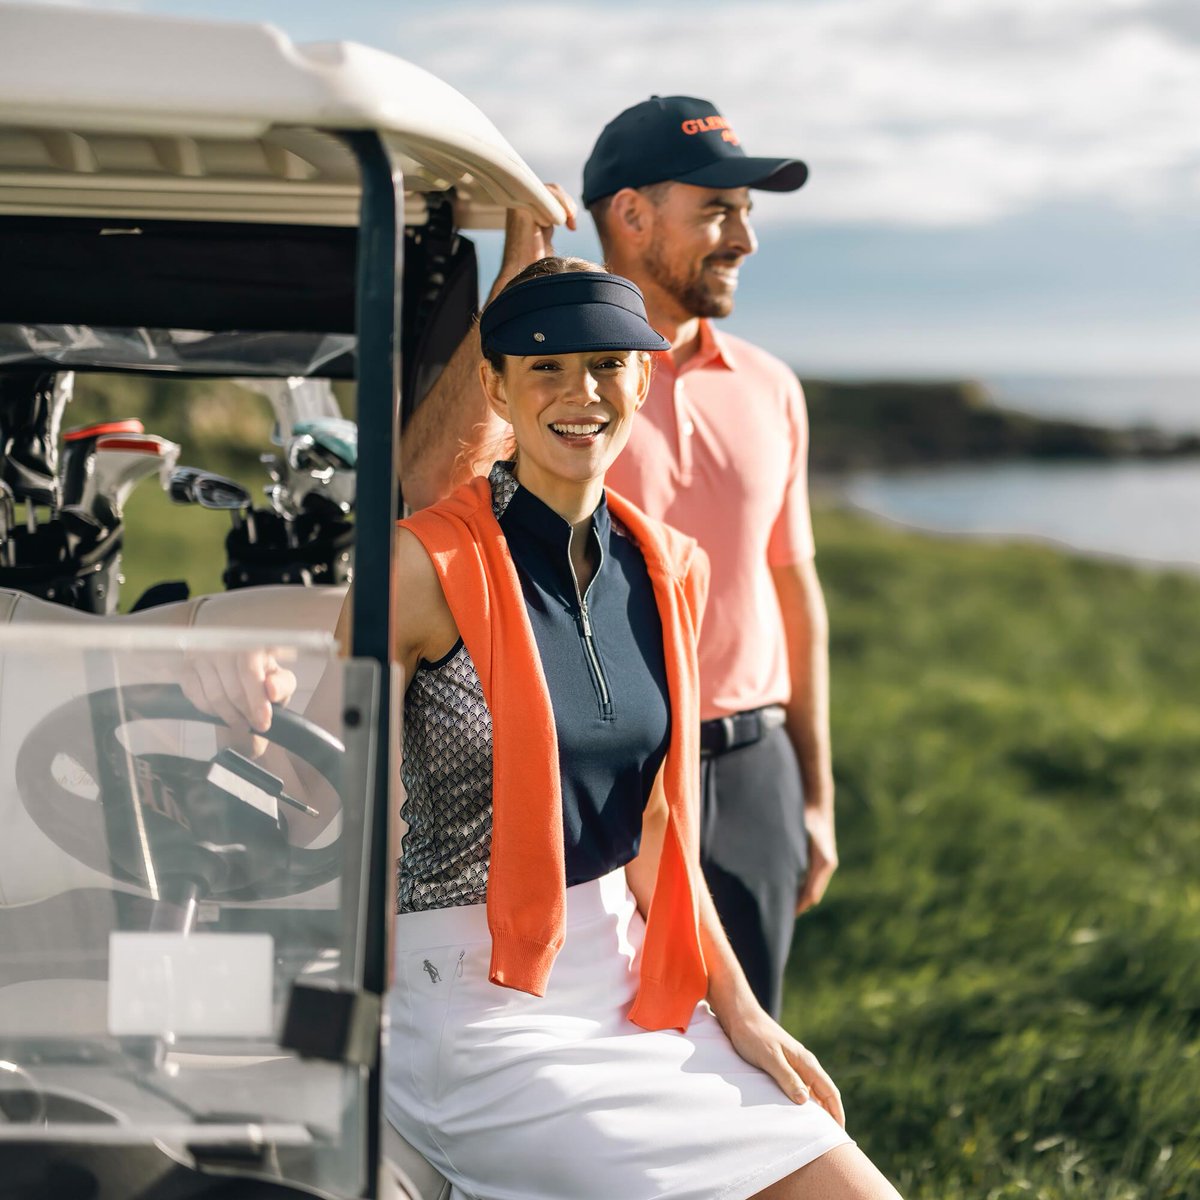 Make a sunny day on course even brighter in this our Apricot, Colour Story classic and sleek navy. #Glenmuir